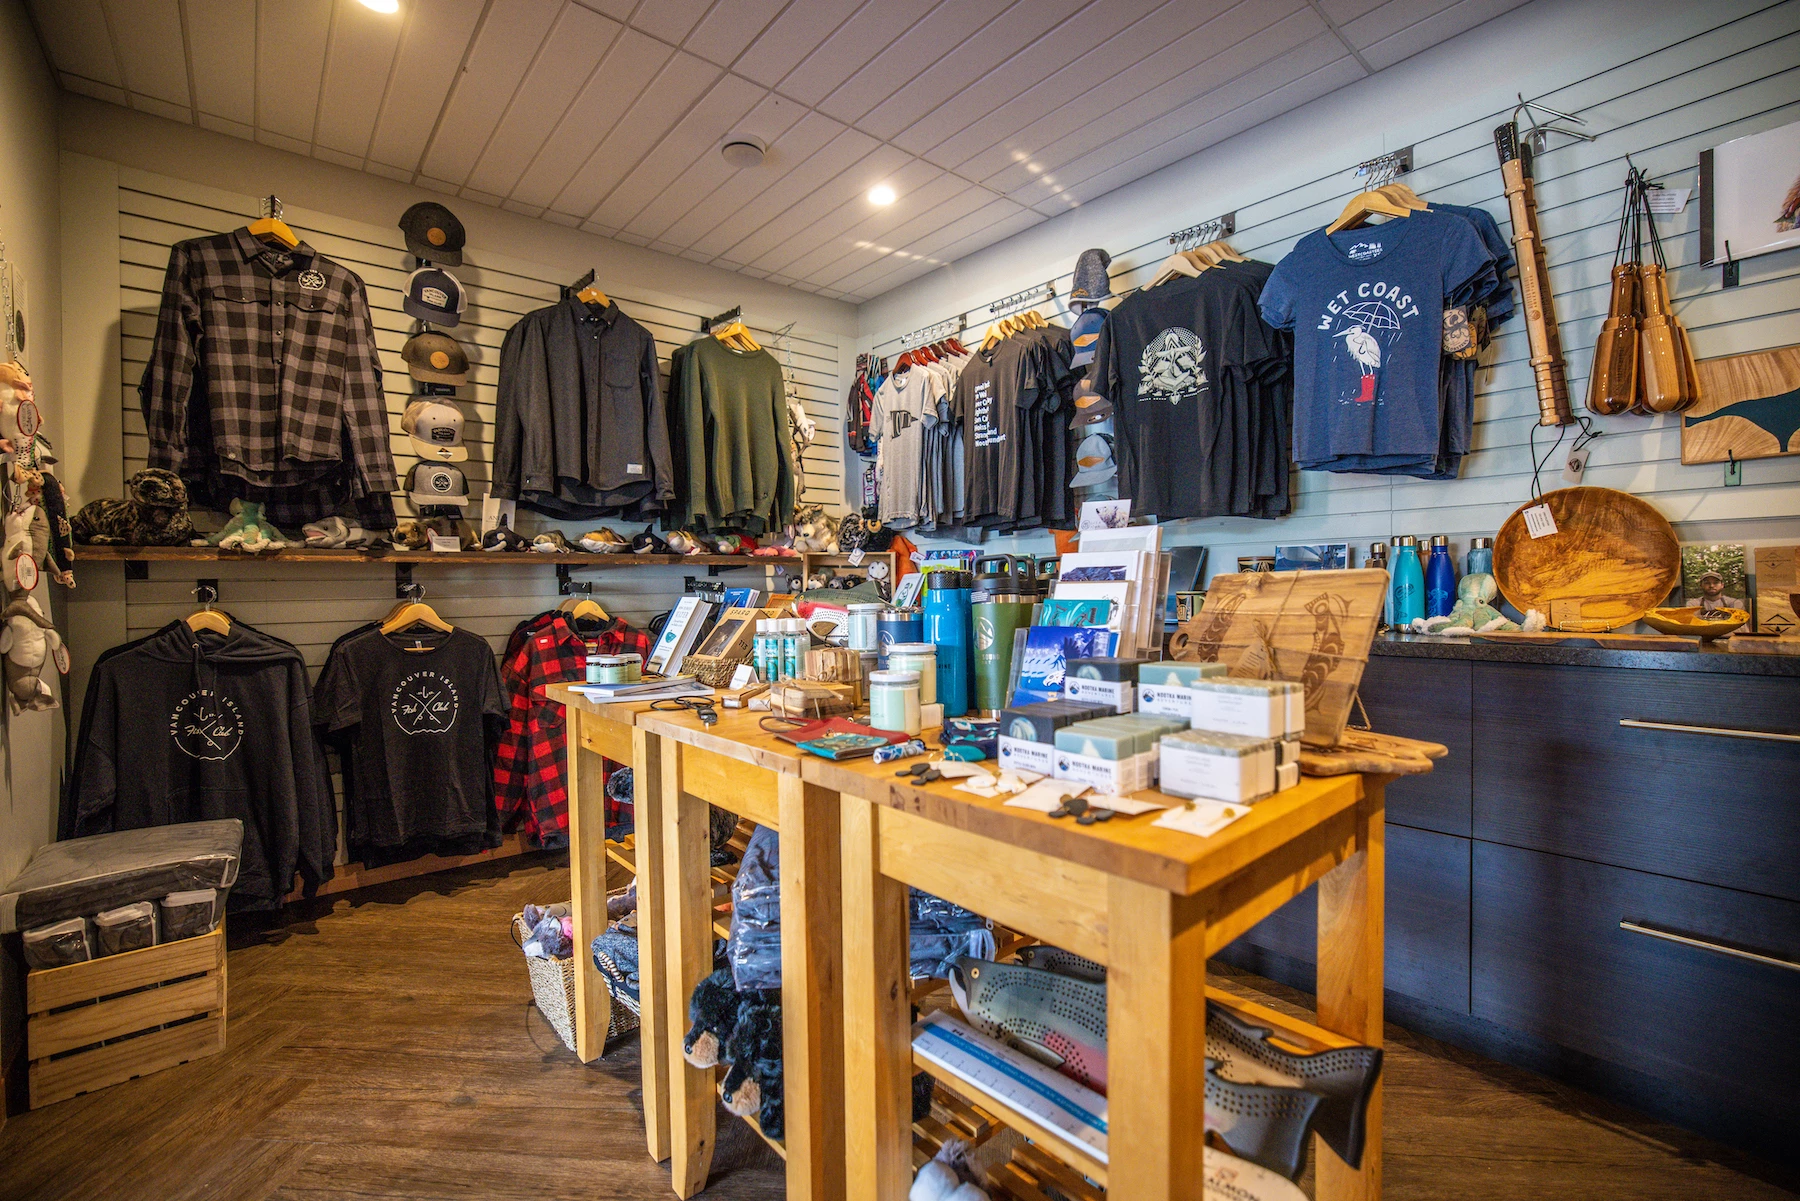 Nootka Sound Resort gift shot with assorted clothing items, hats, and accessories neatly displayed on shelves and racks.